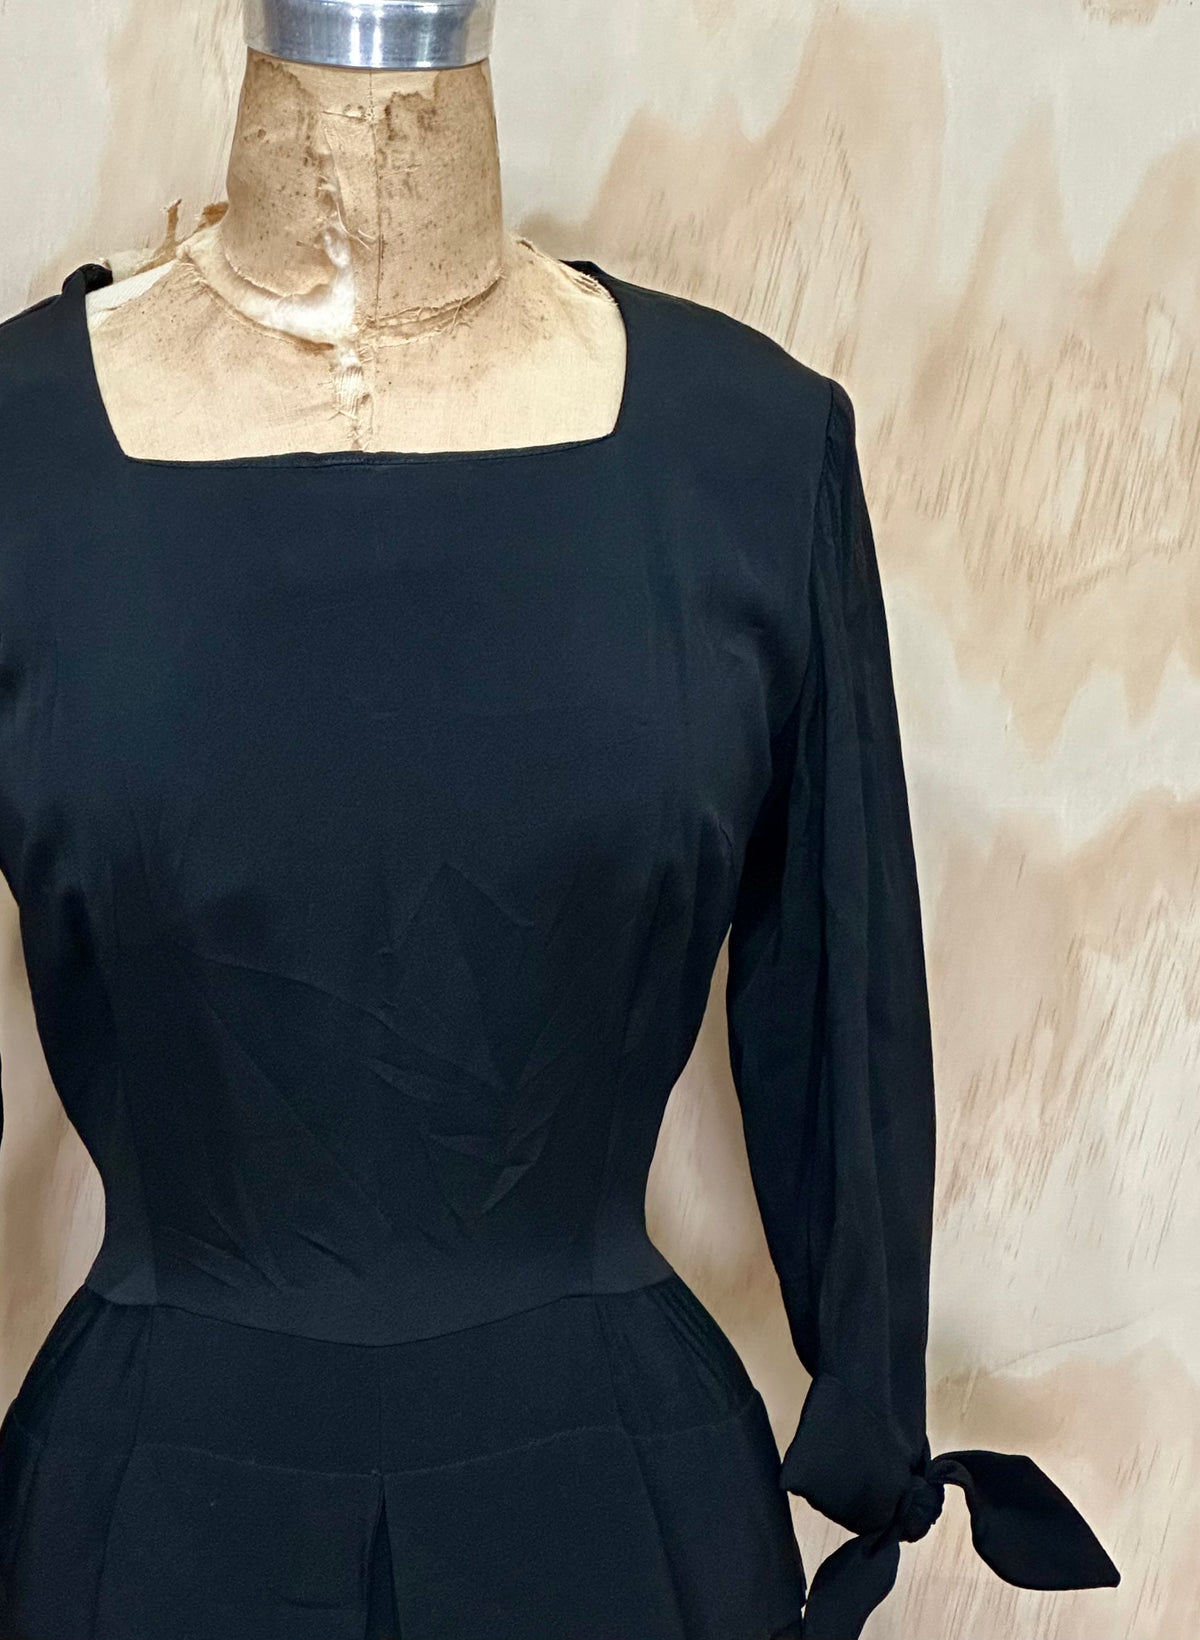 Vintage 50s Black Betty Hartford Dress • Fitted Little Black dress fit and flare